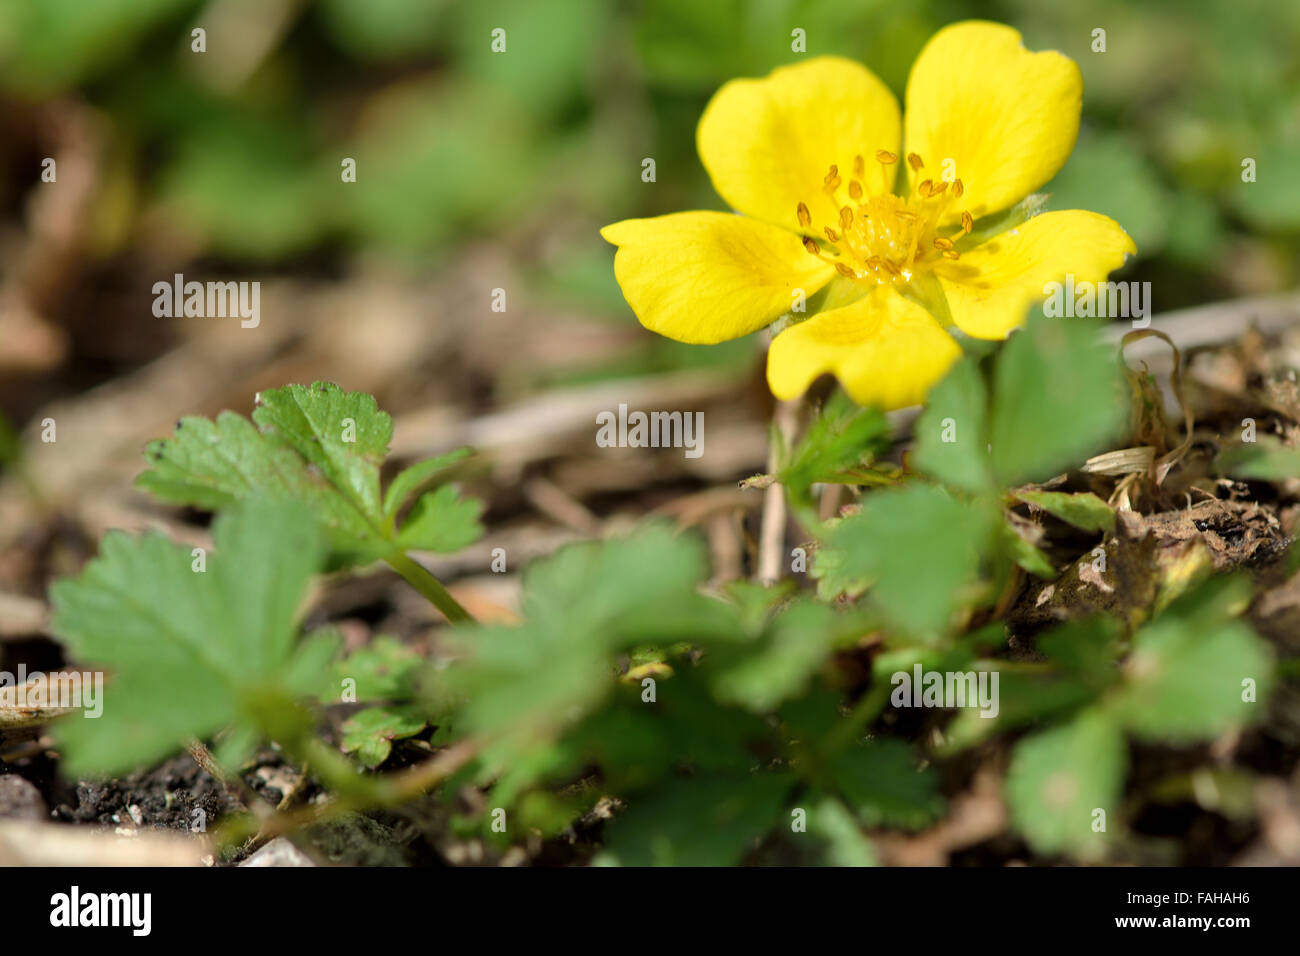 Creeping cinquefoil (Potentilla reptans). A plant in the rose (Rosaceae) family in flower, seen from ground level Stock Photo